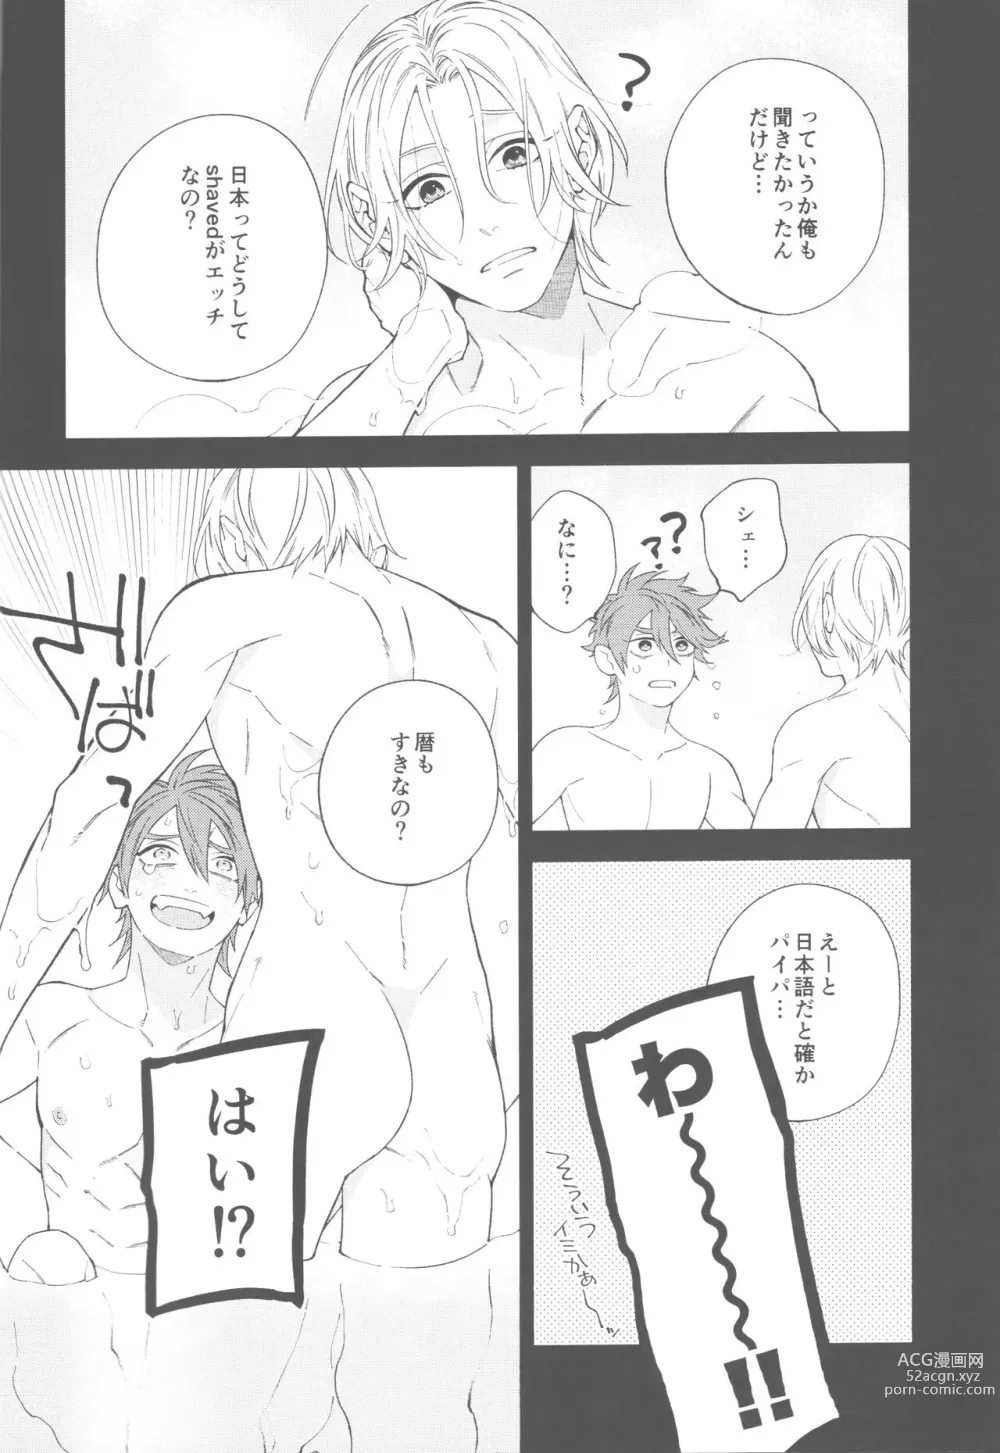 Page 7 of doujinshi SHAVED